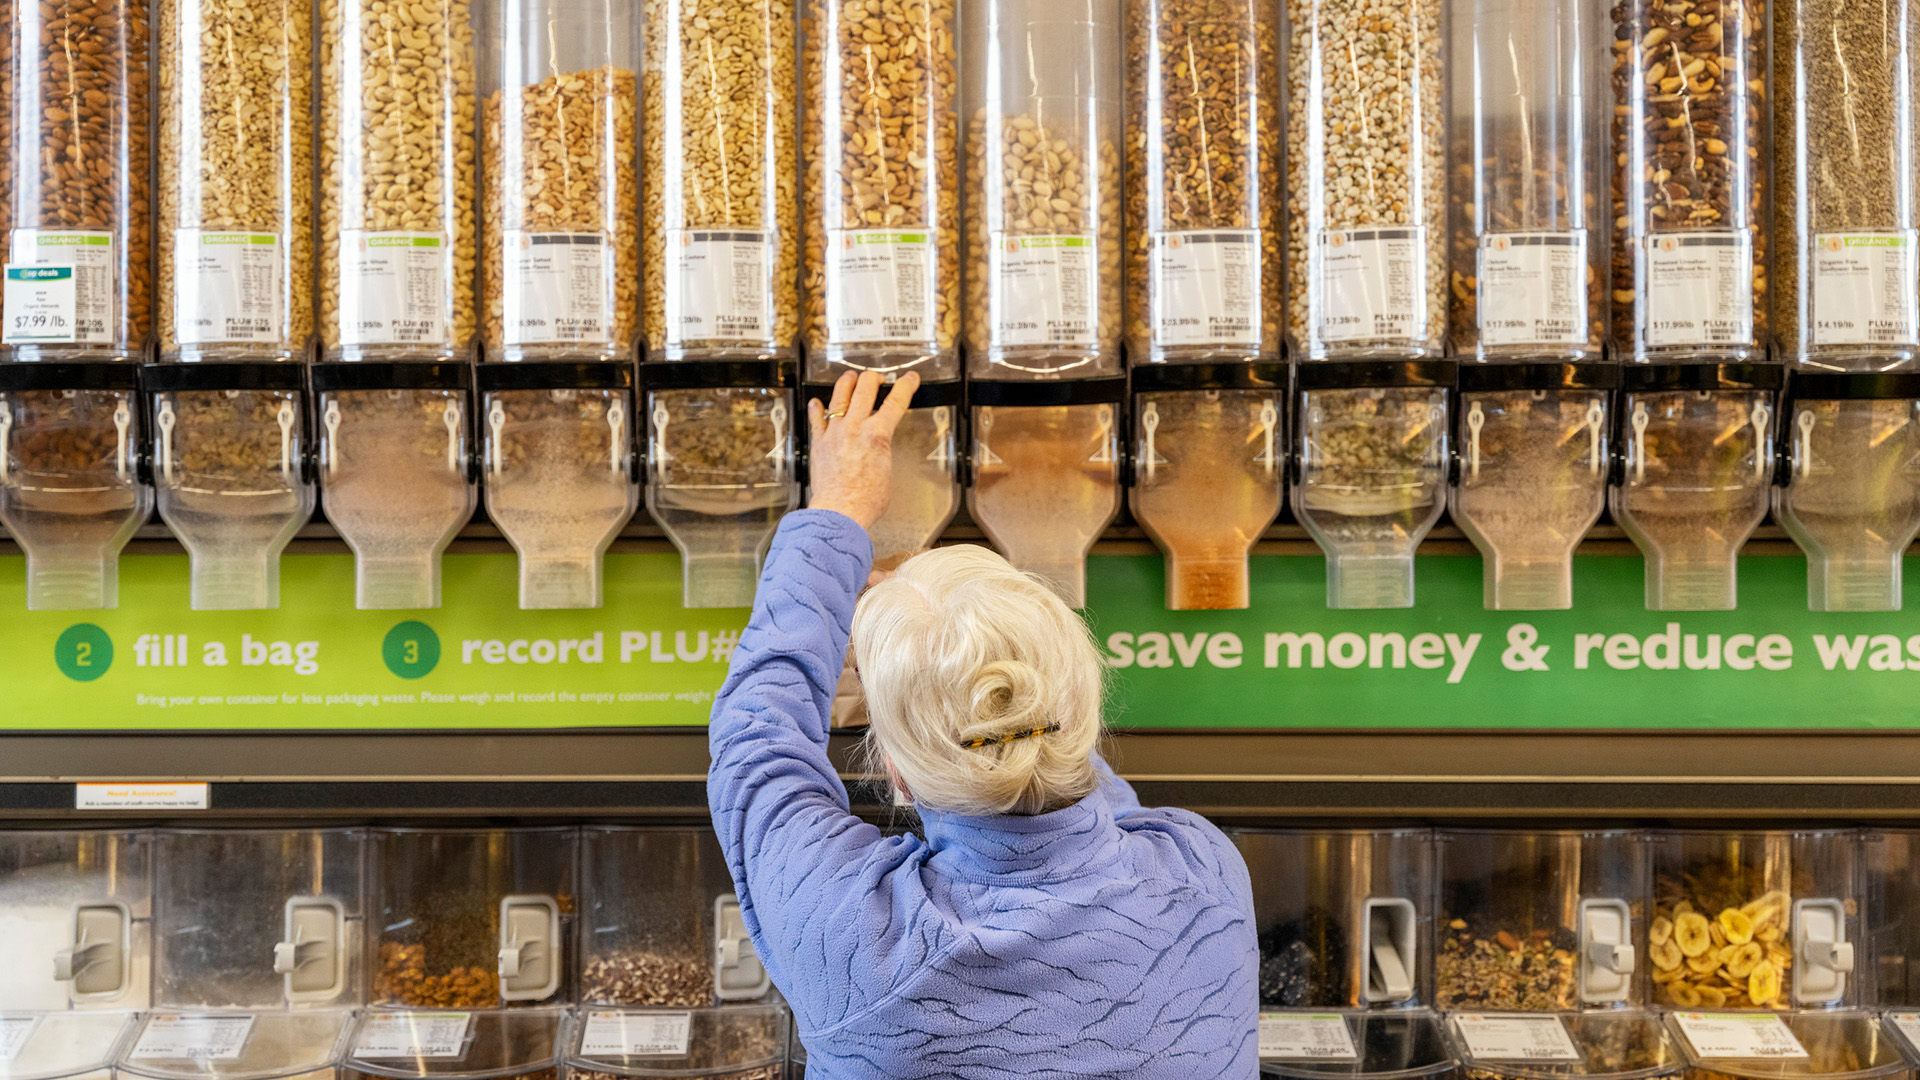 An elderly person with white hair and a blue jacket reaches for a lever on a bulk food dispenser in a store. Various grains, nuts, and cereals are visible in dispensers, with signs explaining the process of filling a bag and the benefits of reducing waste.